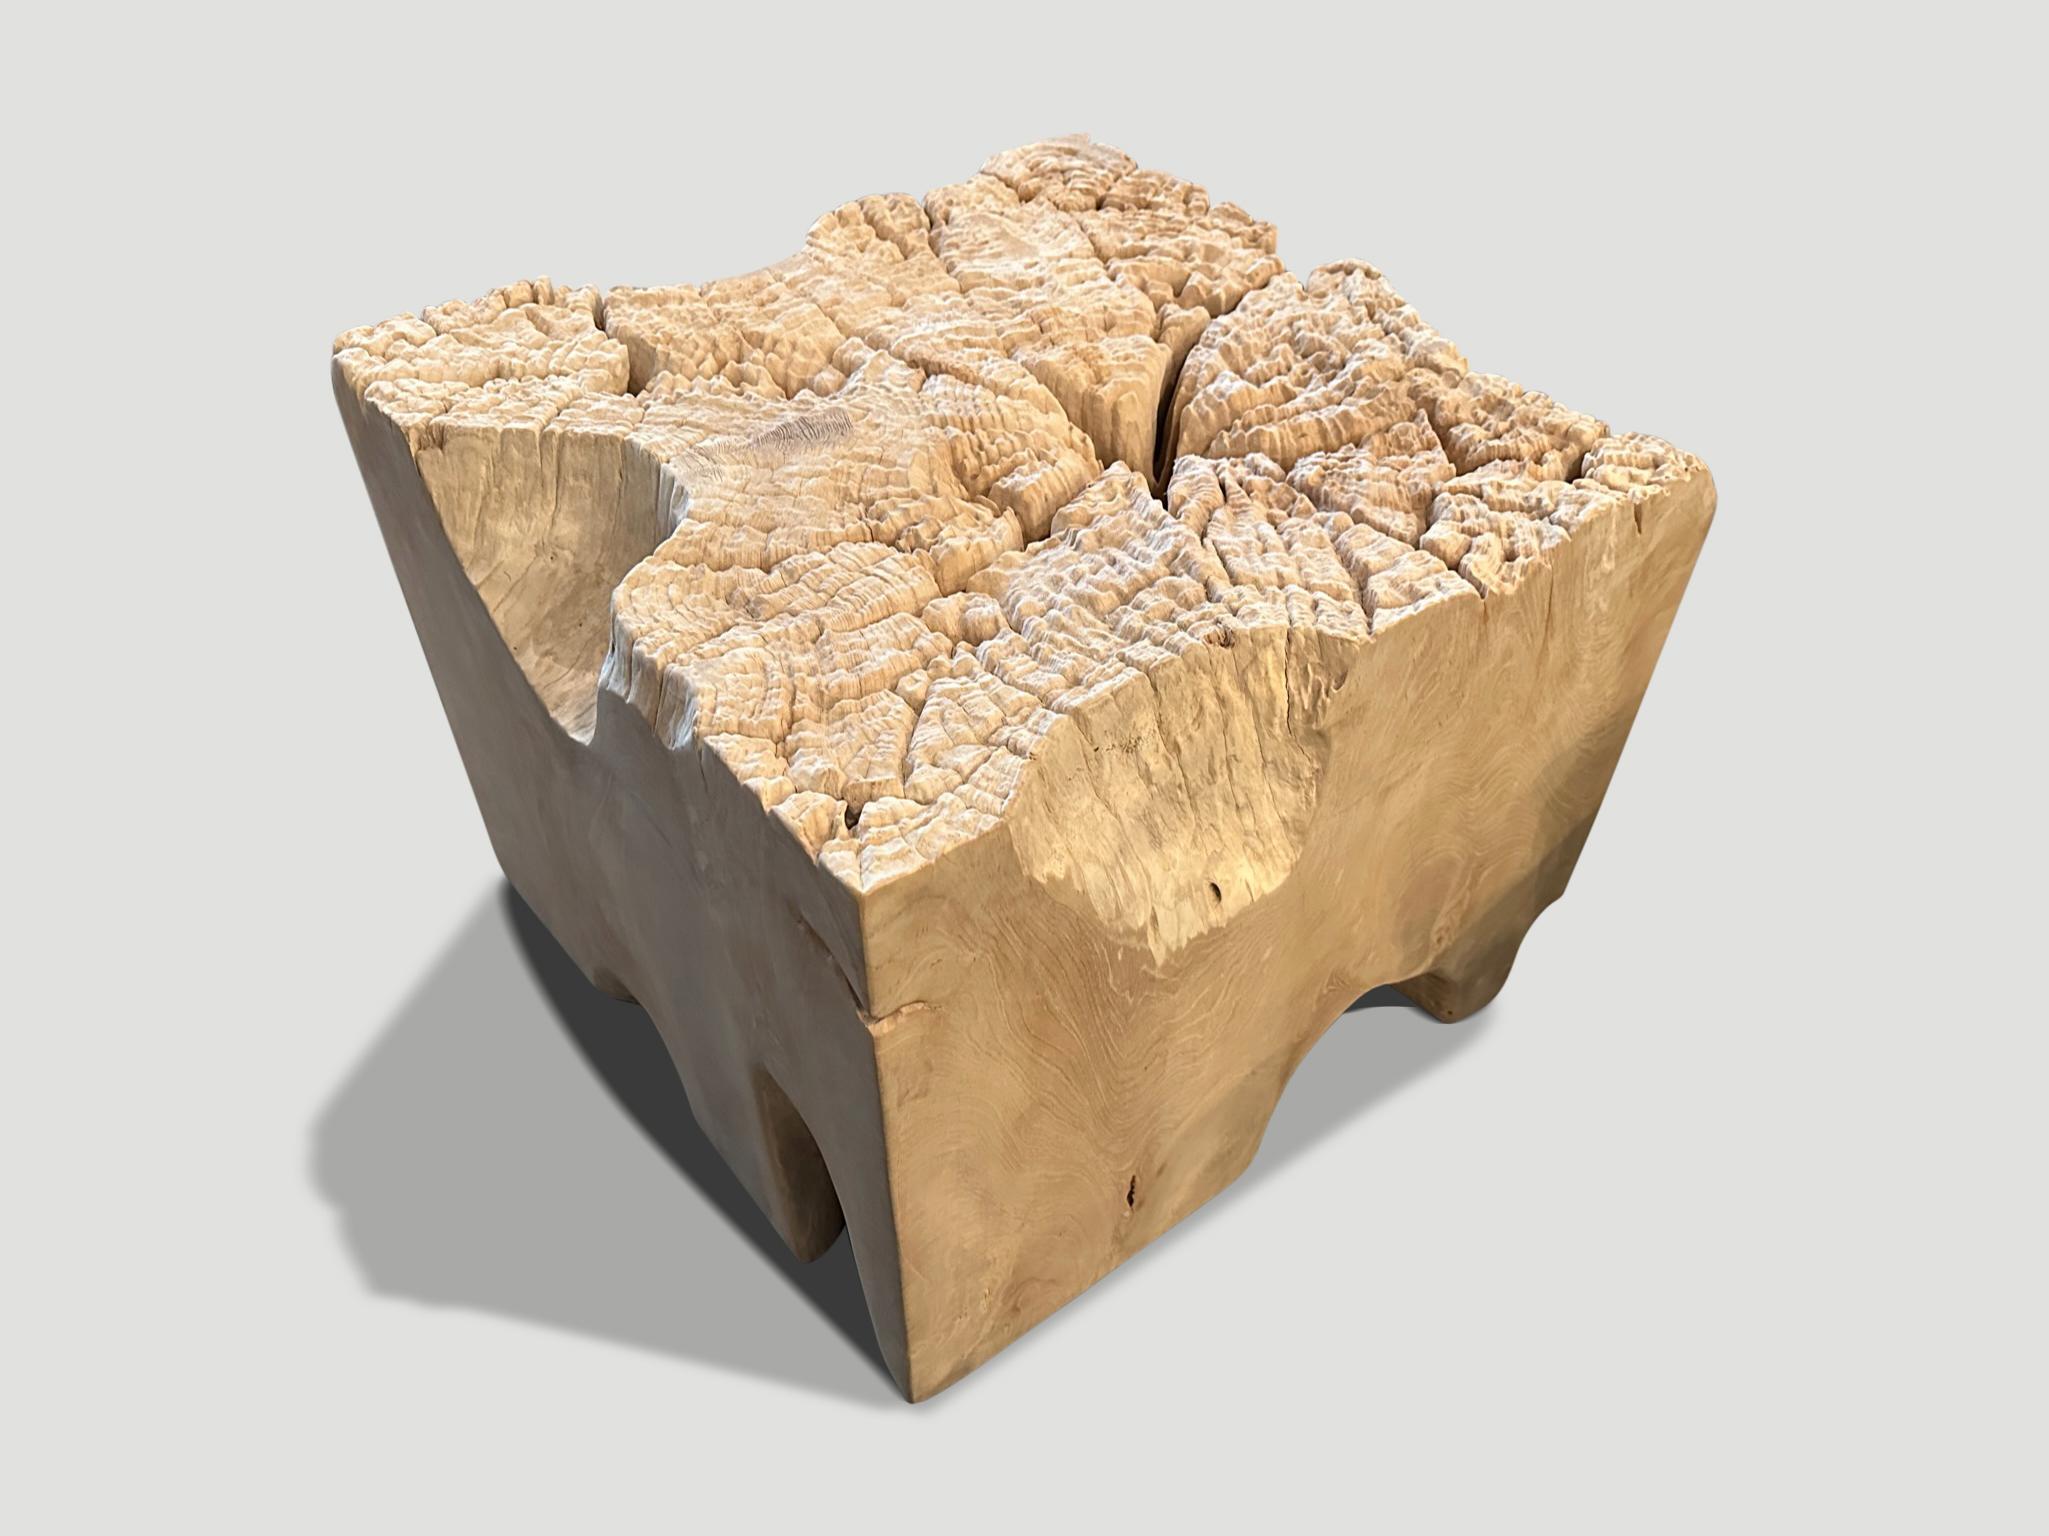 Impressive reclaimed teak root side table or coffee table. Hand carved into this usable shape whilst respecting the natural organic wood. The top has a natural rare erosion which occurs with wood over a hundred years old. Both sculptural and usable.